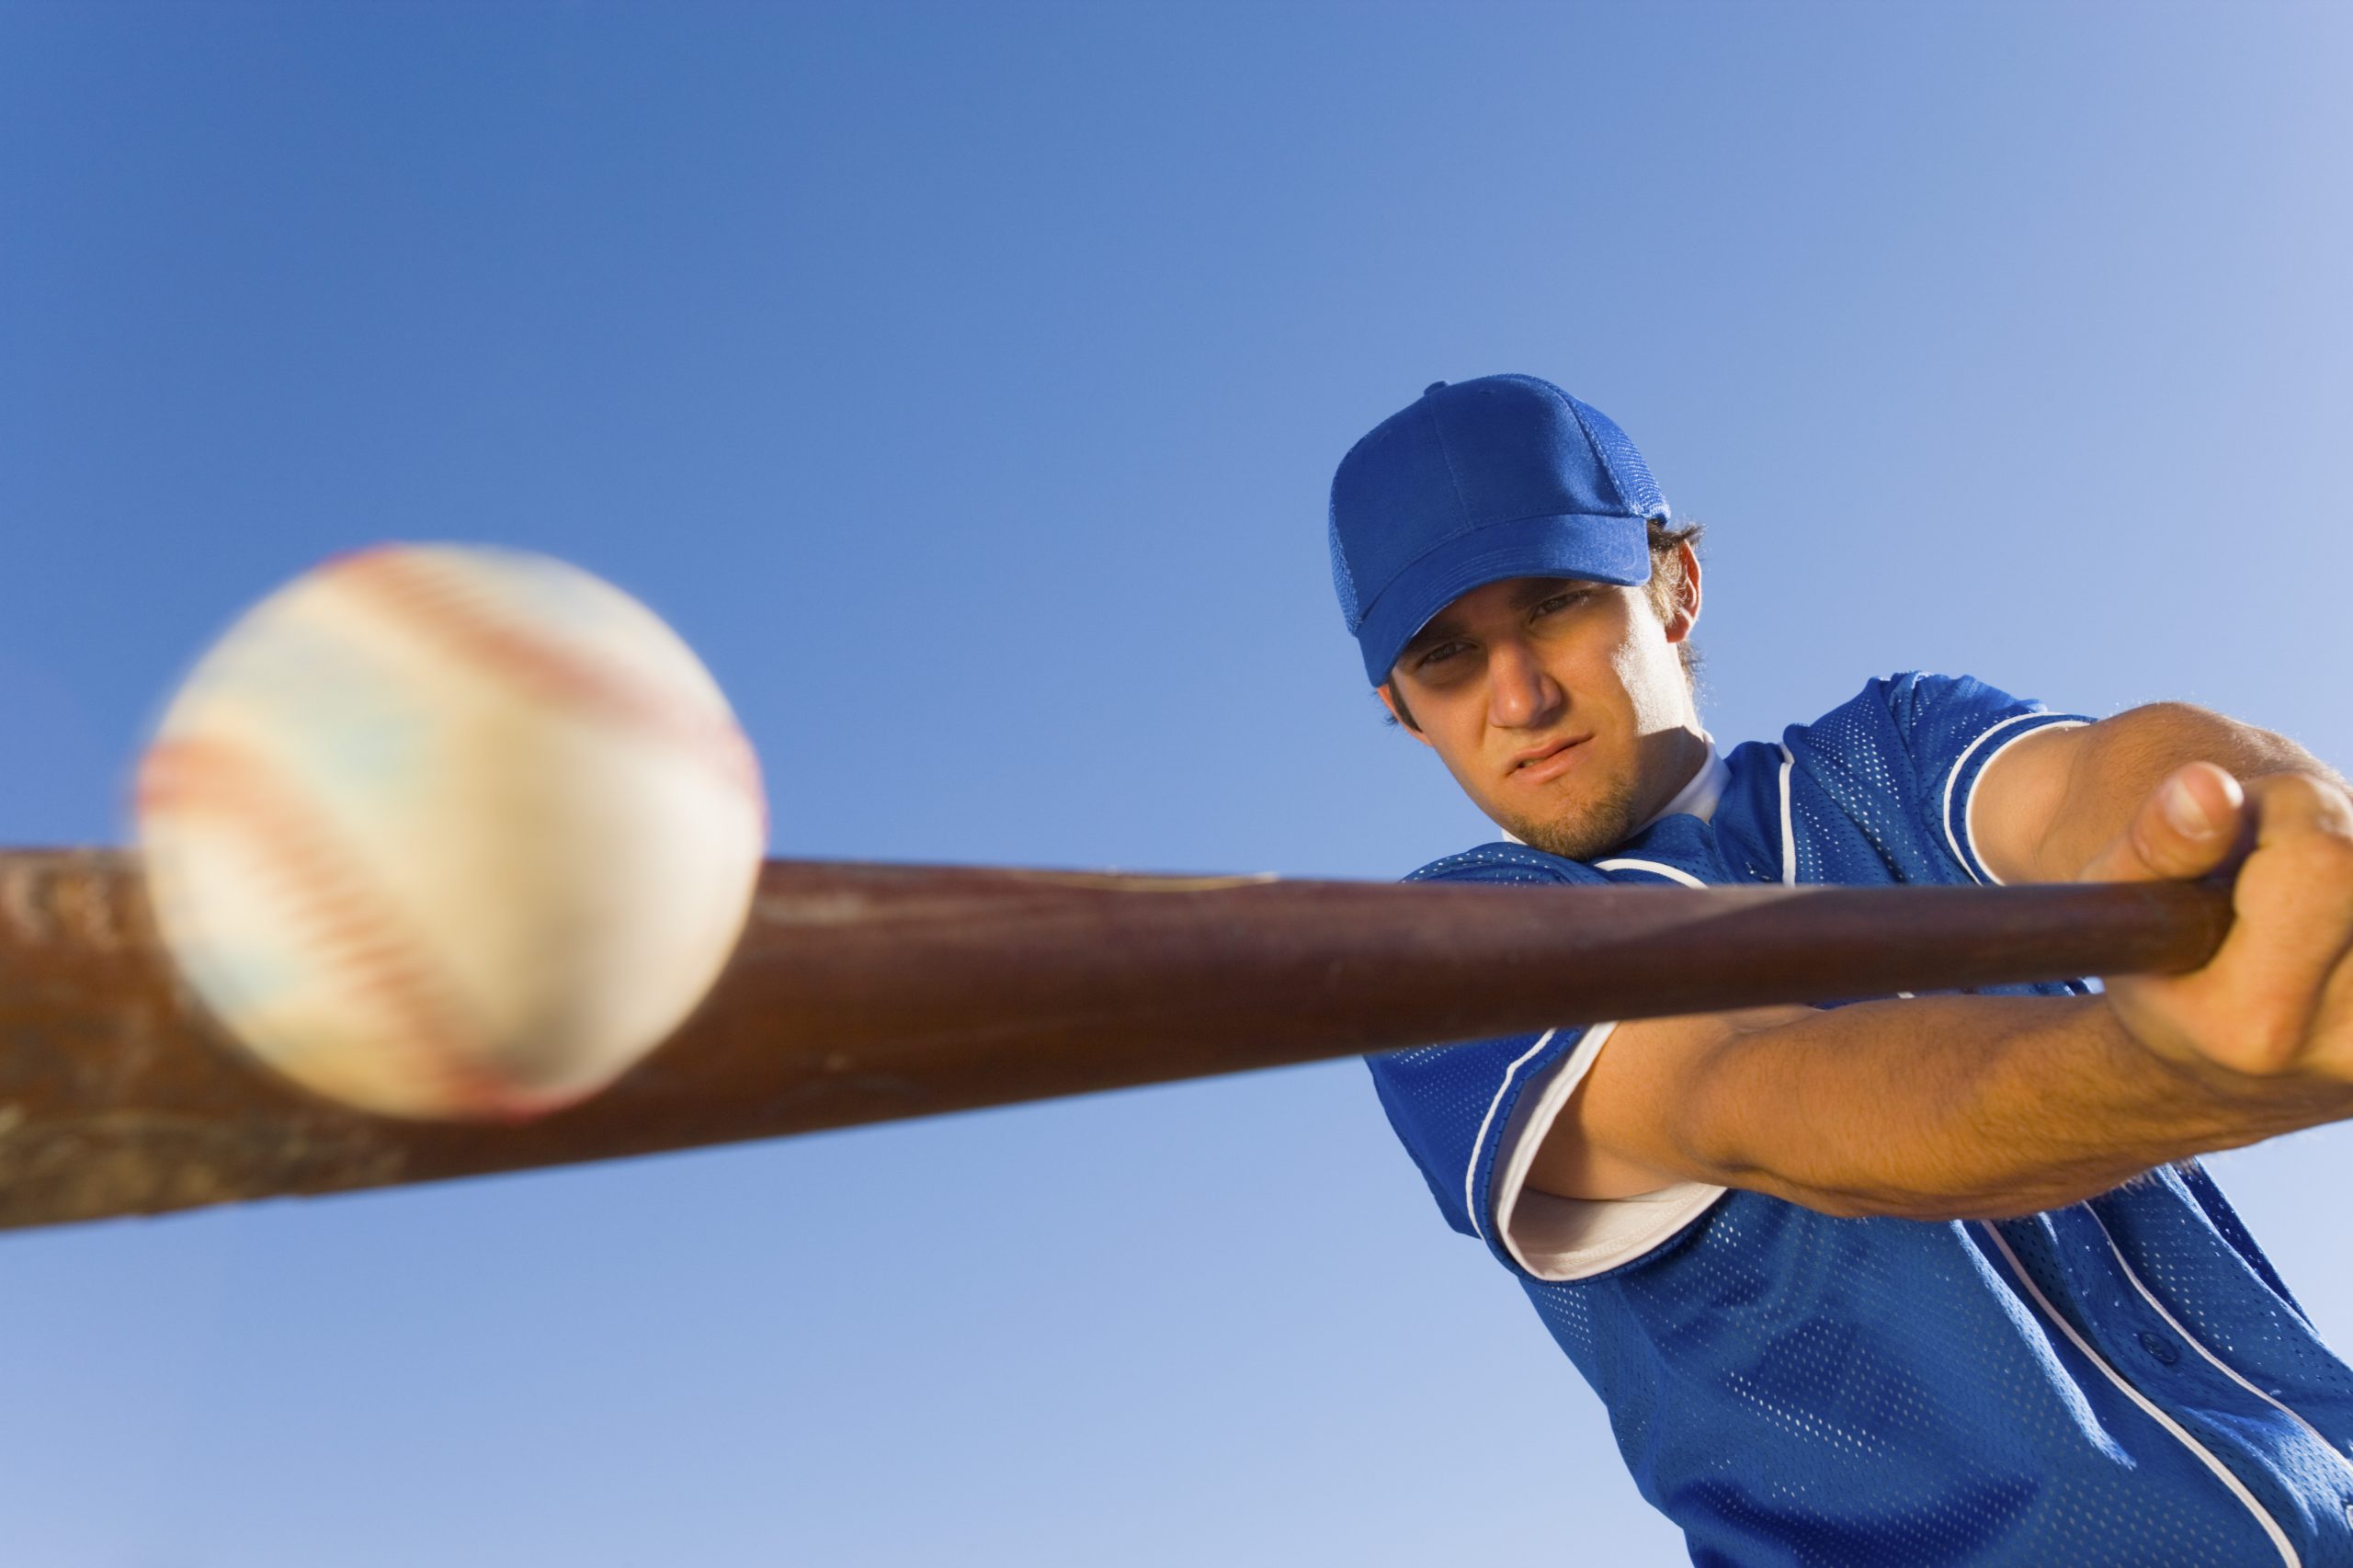 Two sports analogies proven useful in business presentations.